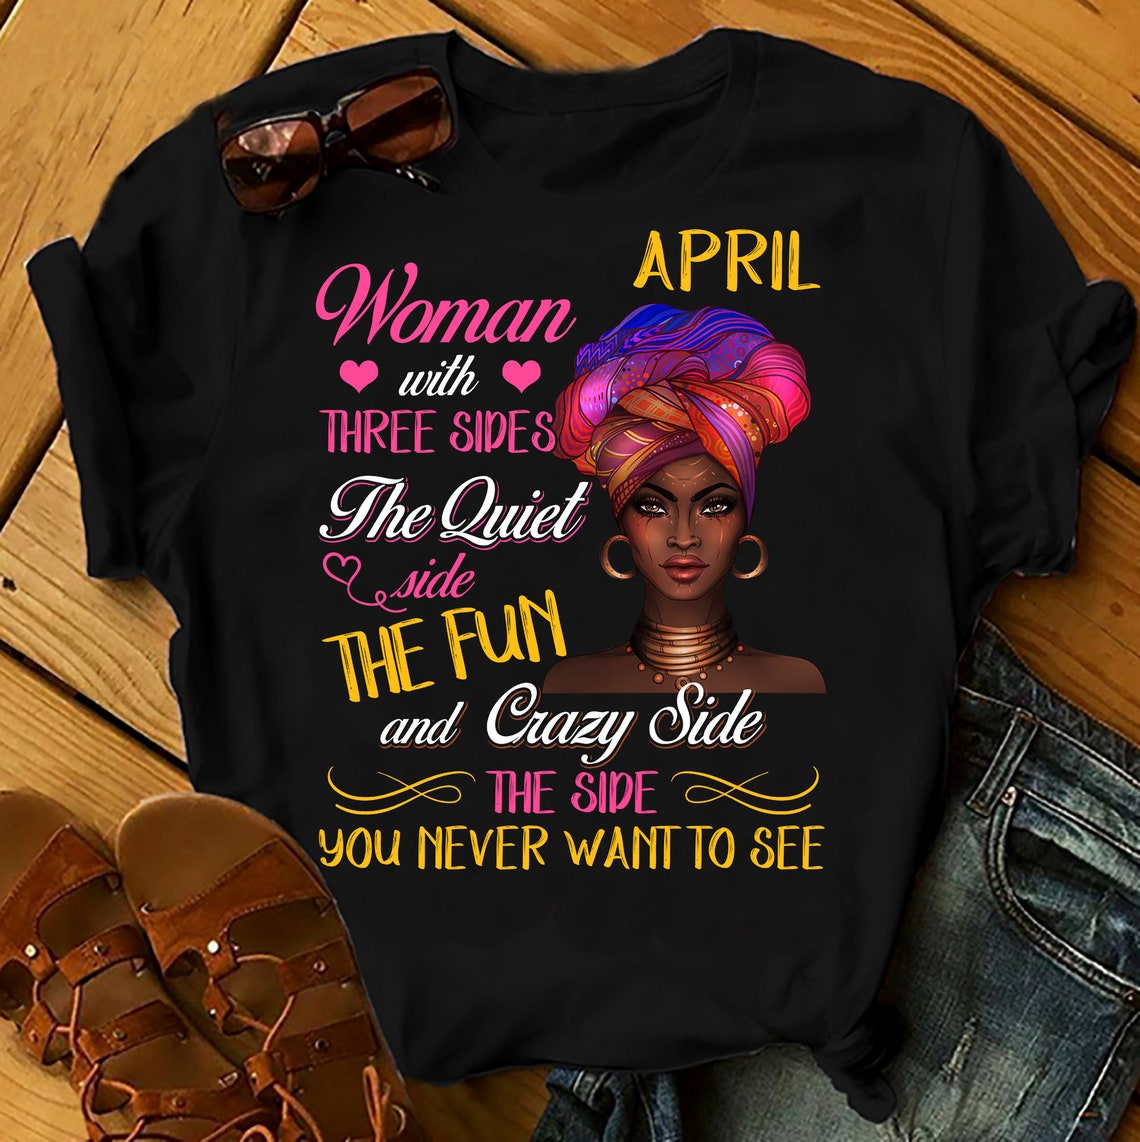 April Woman With Three Sides Shirts Women